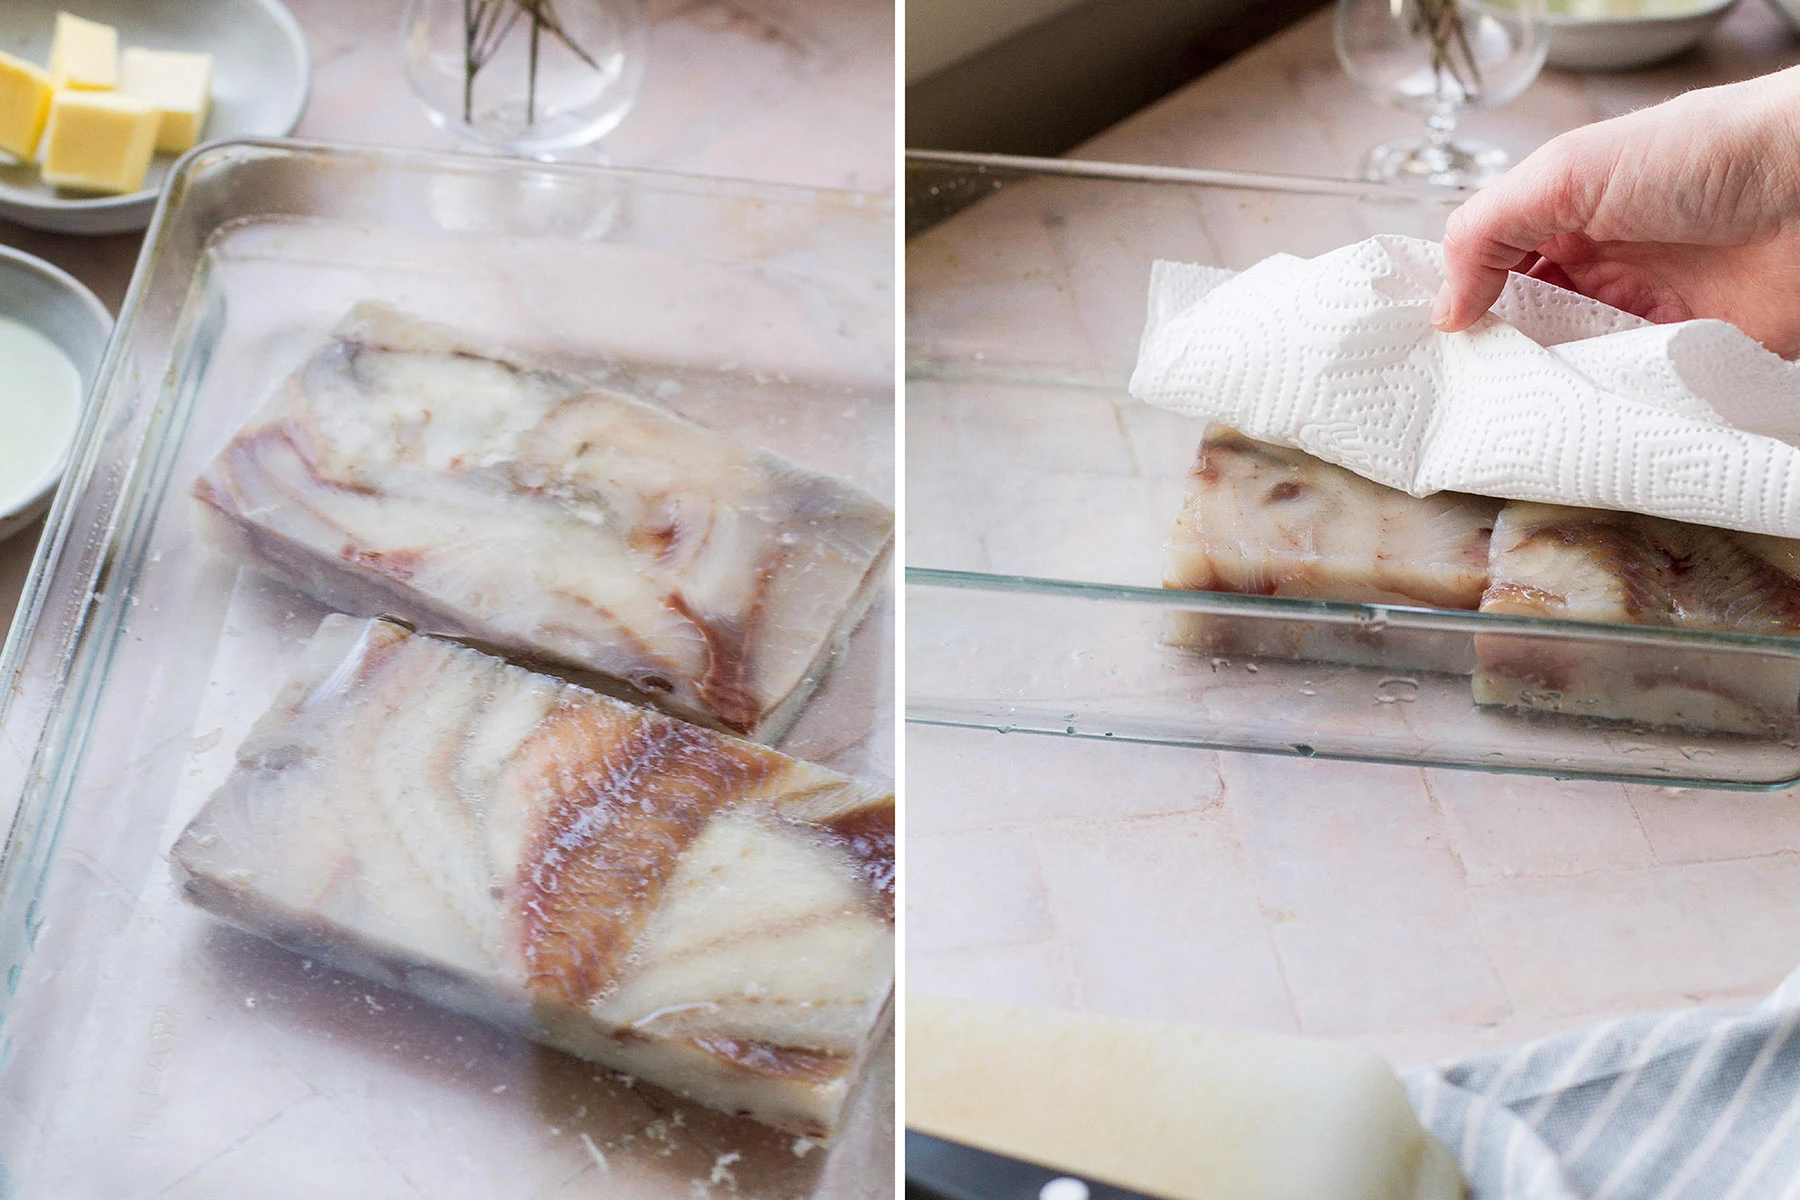 Steps to cook with frozen fish.